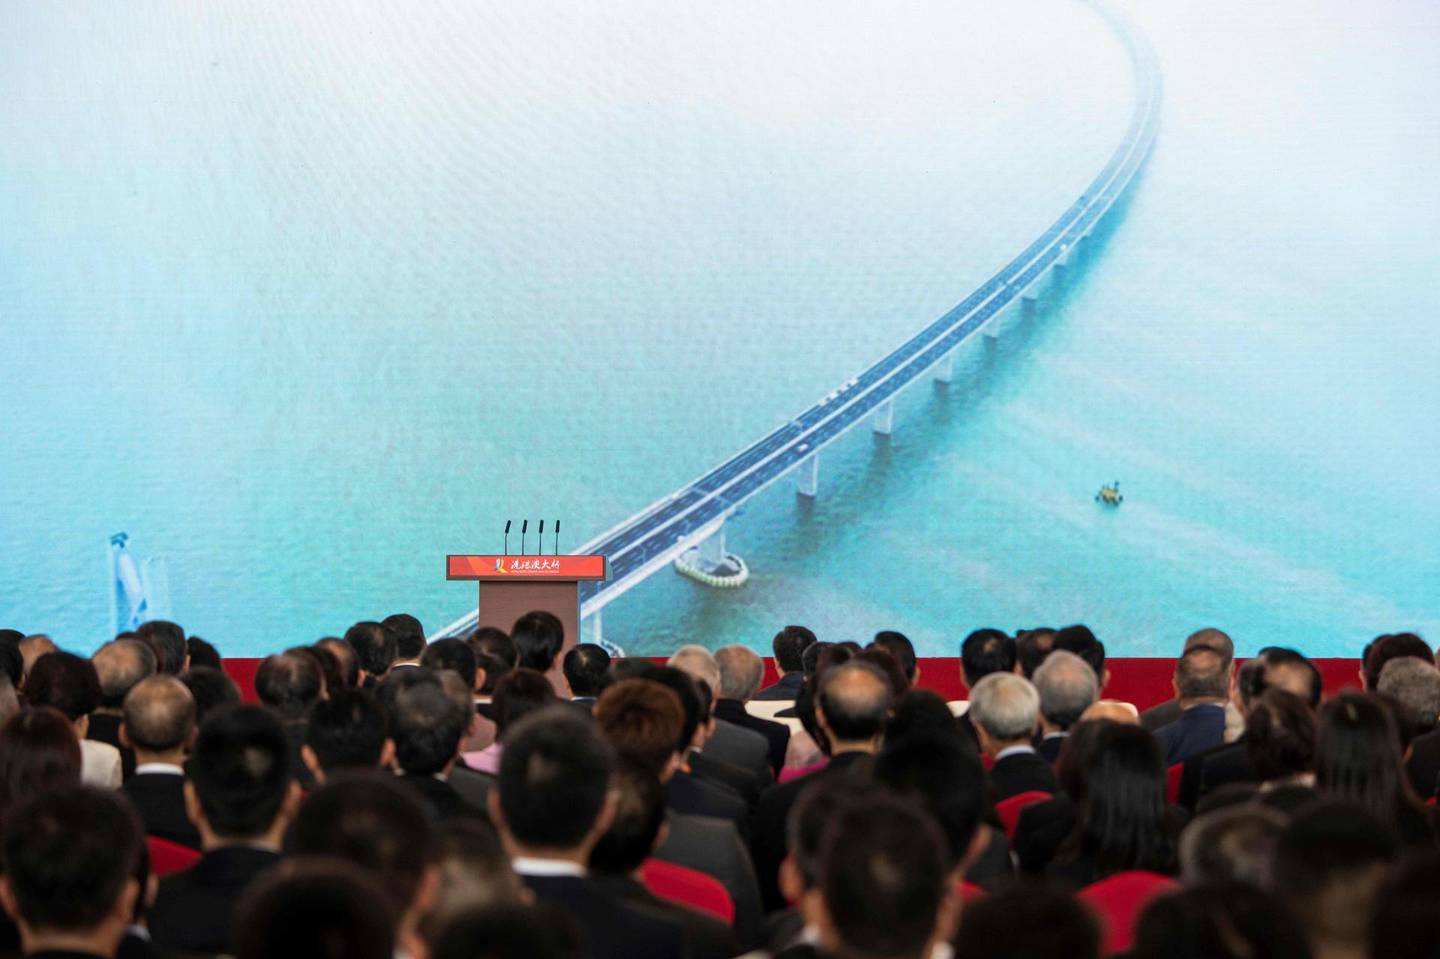 Guests and politics watch a trailer on a giant screen during the opening ceremony of the Hong Kong-Zhuhai-Macau Bridge at the Zhuhai Port terminal on October 23, 2018. China's President Xi Jinping launched the world's longest sea bridge connecting Hong Kong, Macau and mainland China on October 23 at a time when Beijing is tightening its grip on its semi-autonomous territories. / AFP / FRED DUFOUR
